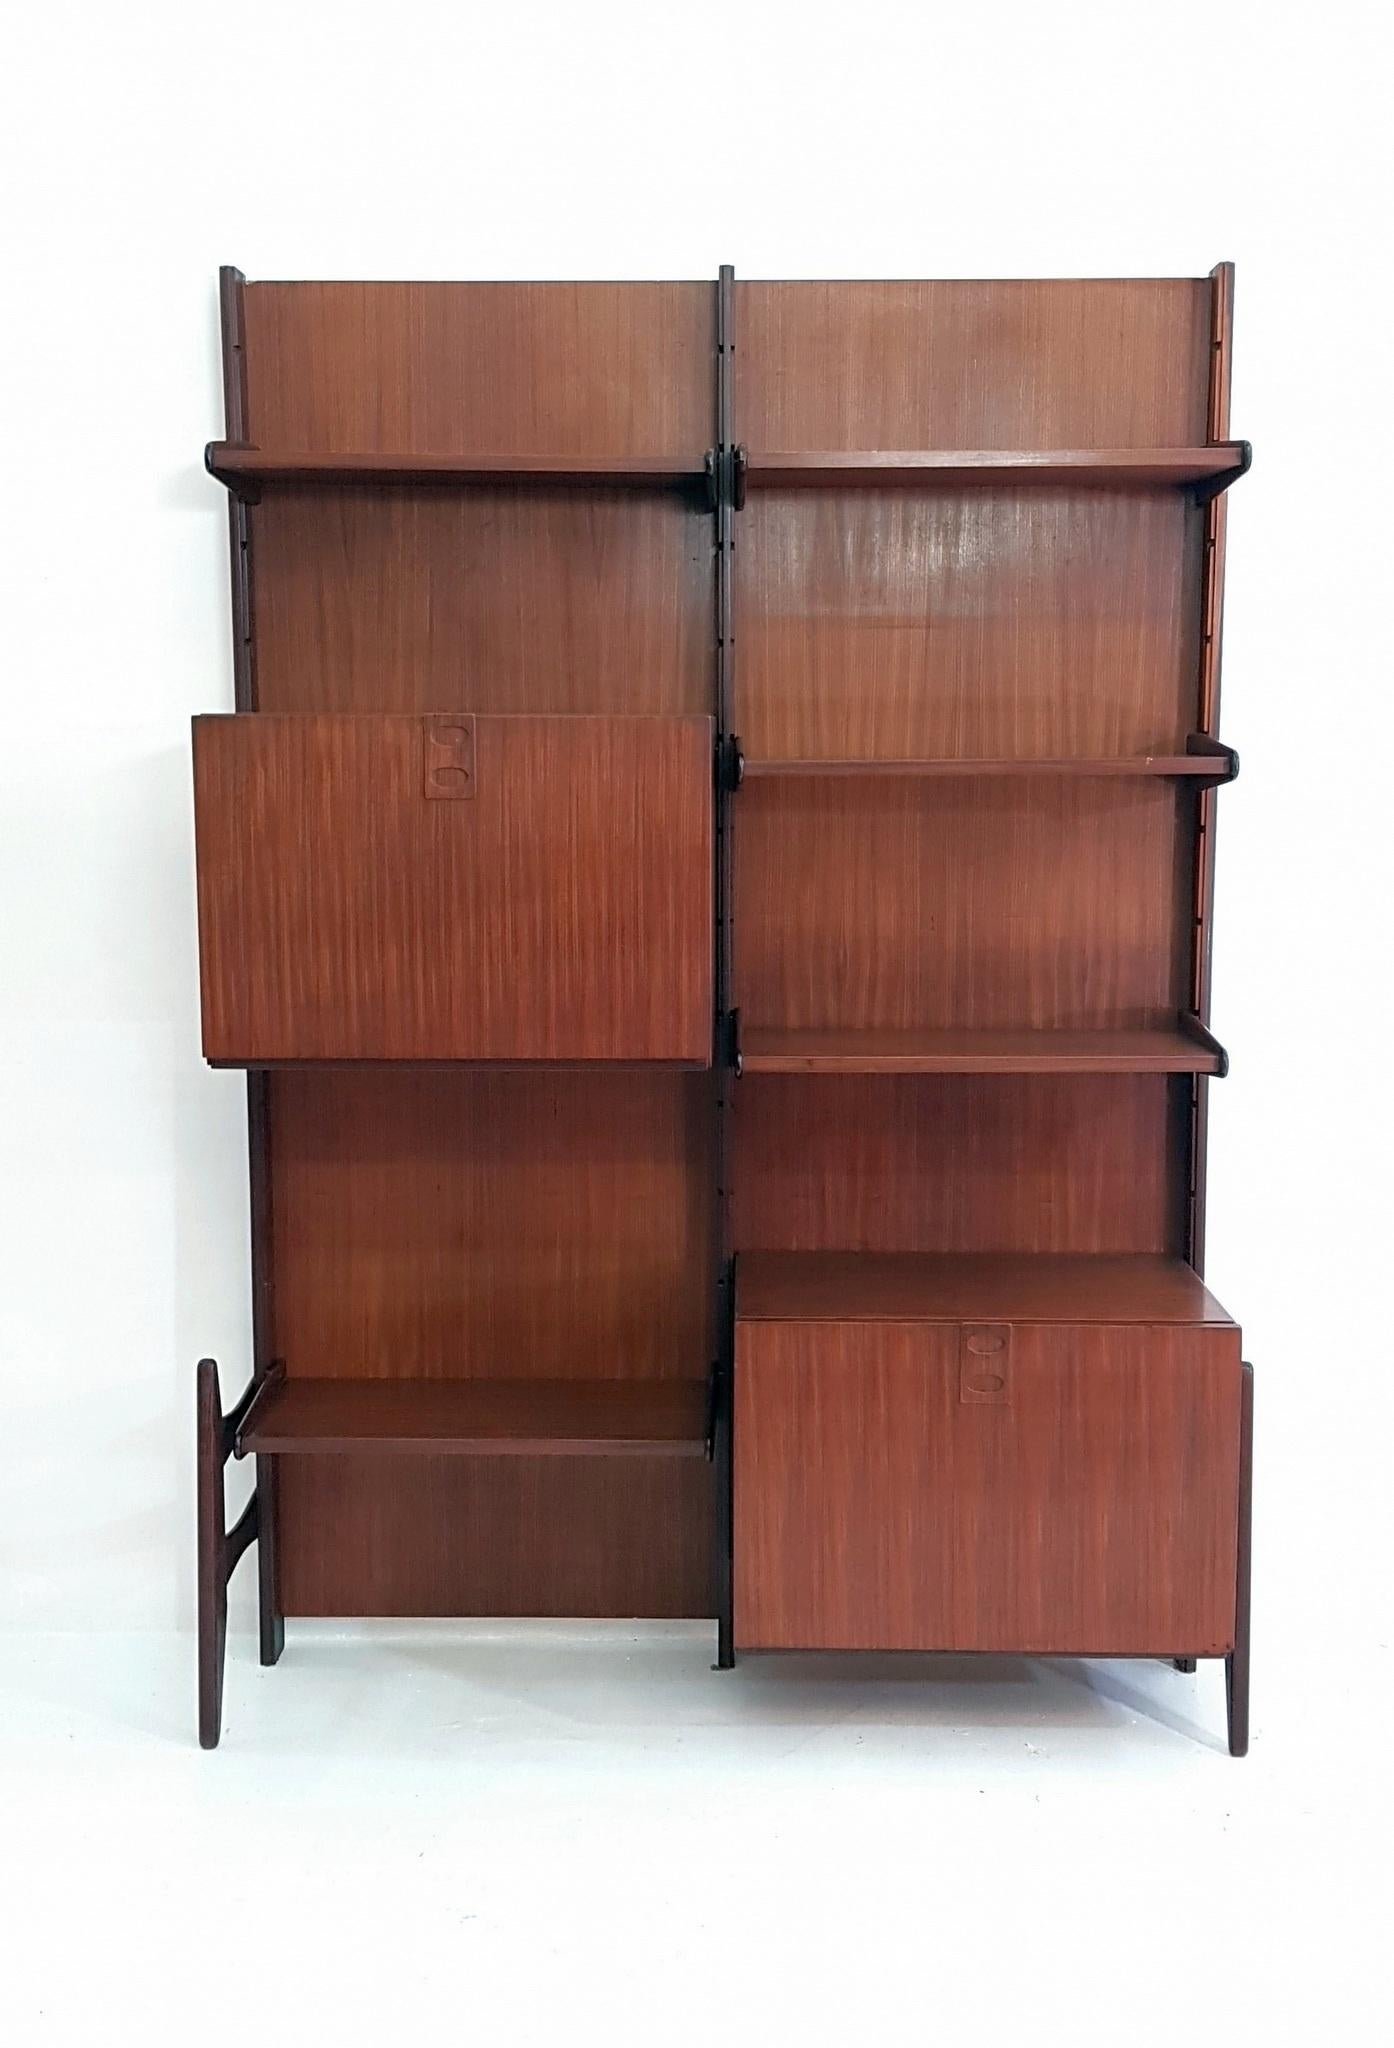 Step into the captivating world of Frattelli Proserpio's timeless craftsmanship with this exquisite 1960s teak wall unit. Created by the talented Proserpio brothers in their factory, which still thrives to this day, this freestanding marvel is sure